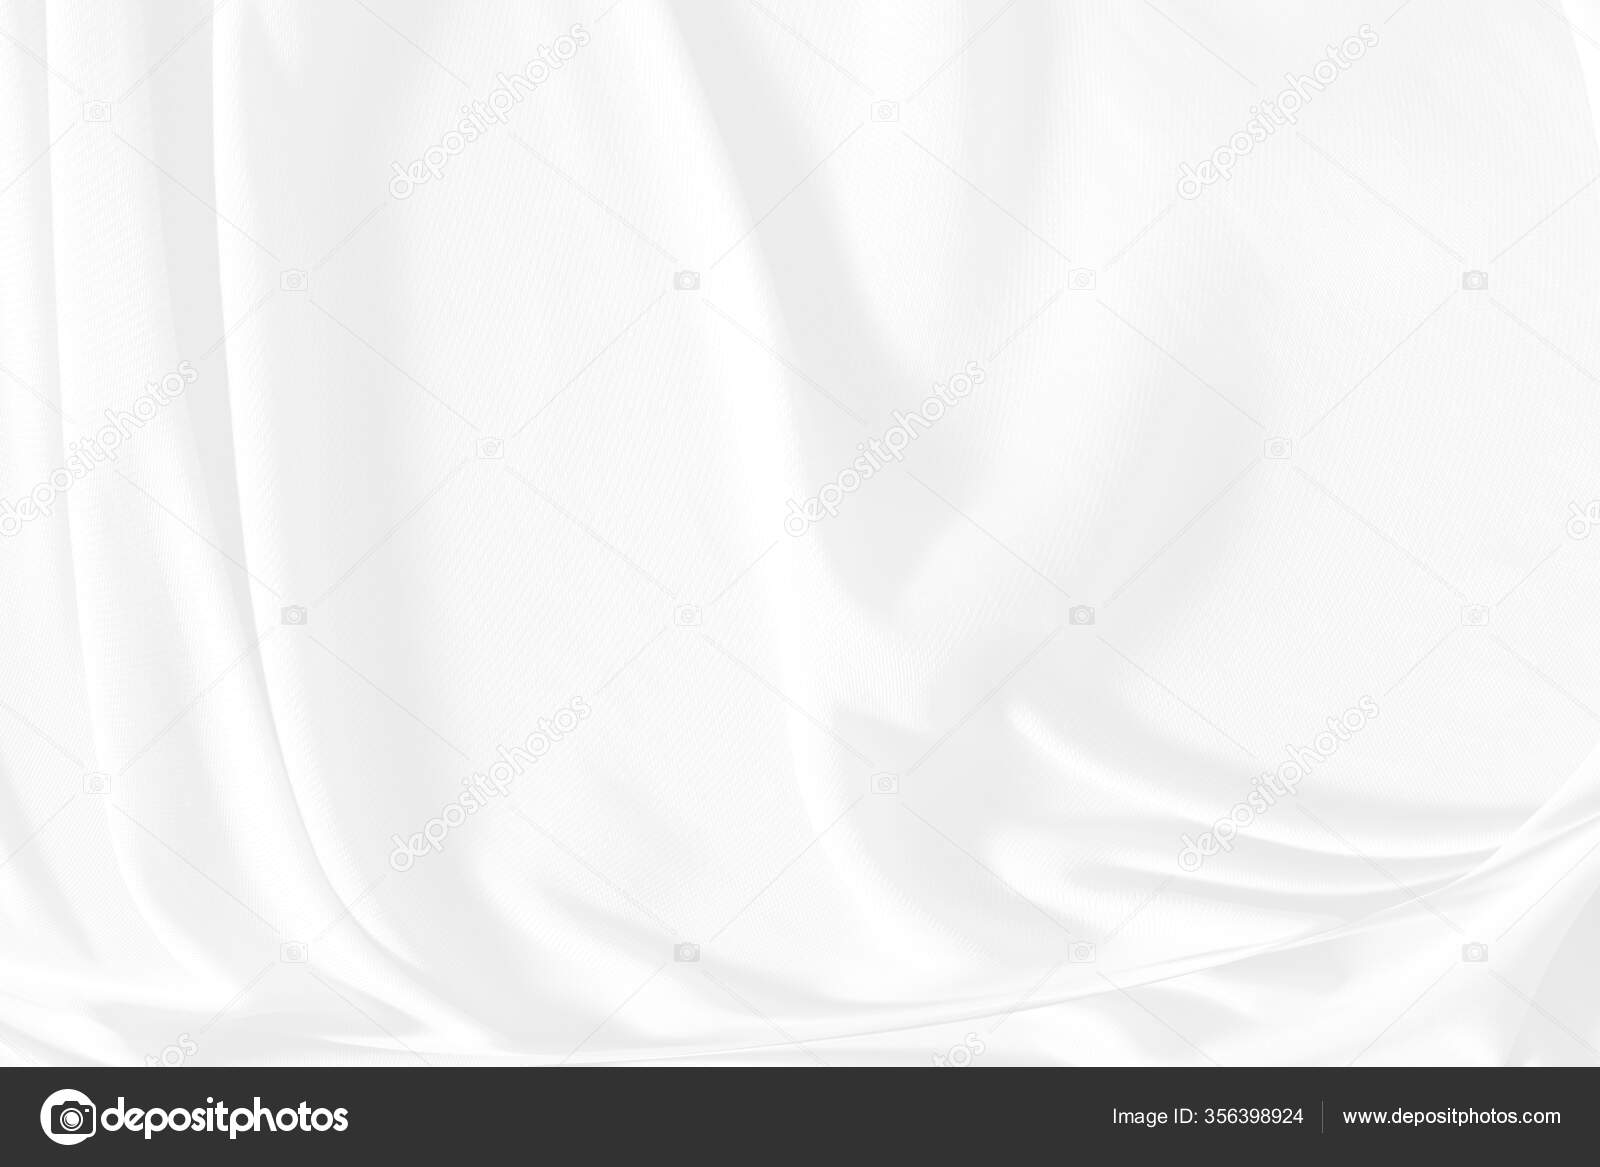 White Cloth Background Abstract Fabric Wrinkled Sofe Wave Material Used  Stock Photo by ©setthaphatdc415@gmail.com 356398924